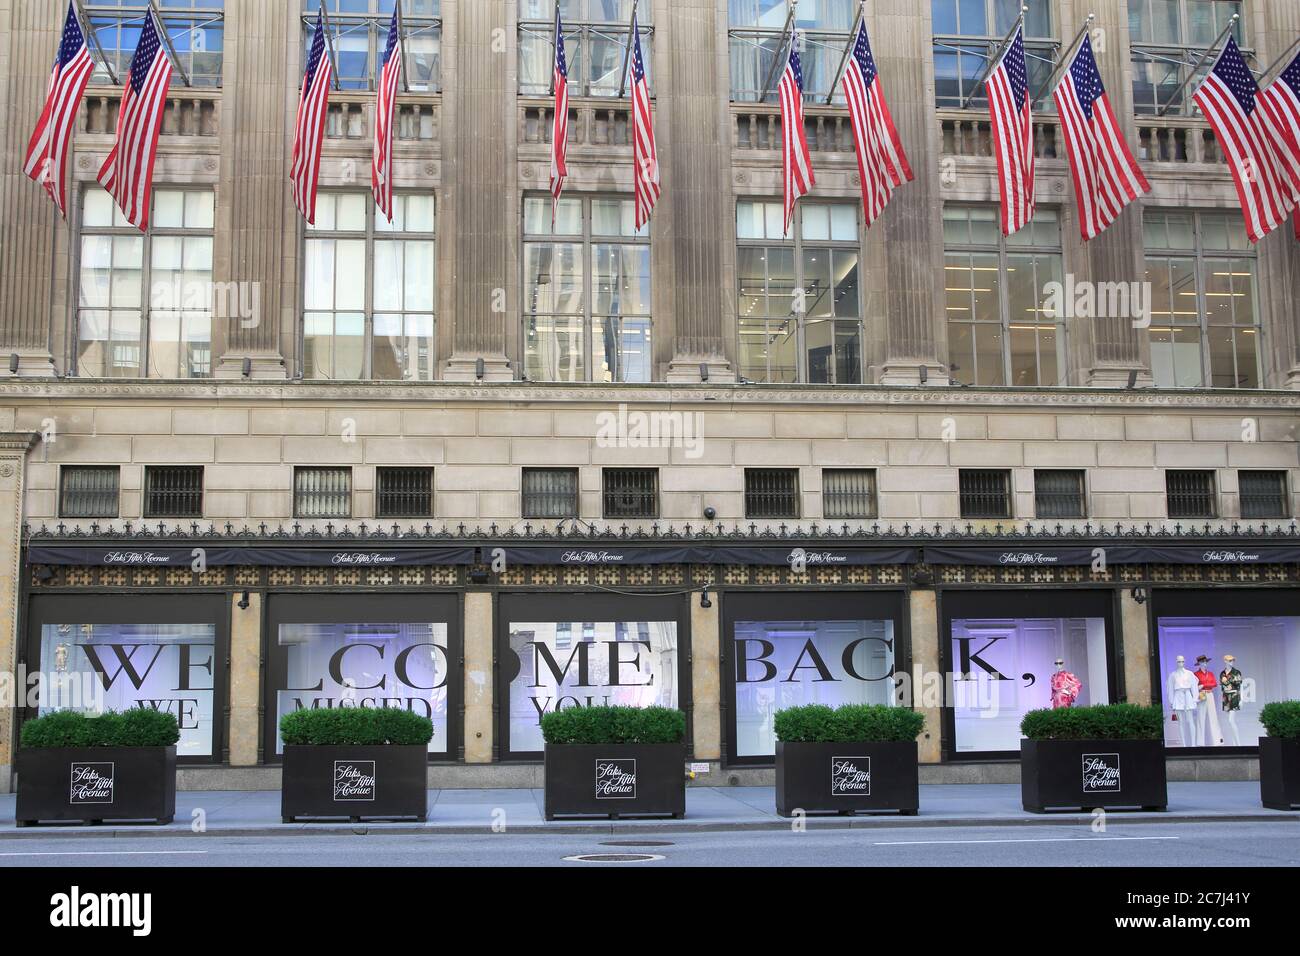 Saks Fifth Avenue department store welcome back sign in windows for reopening in Phase 3 during COVID-19 pandemic, Midtown, Manhattan, New York City, USA July 2020 Stock Photo